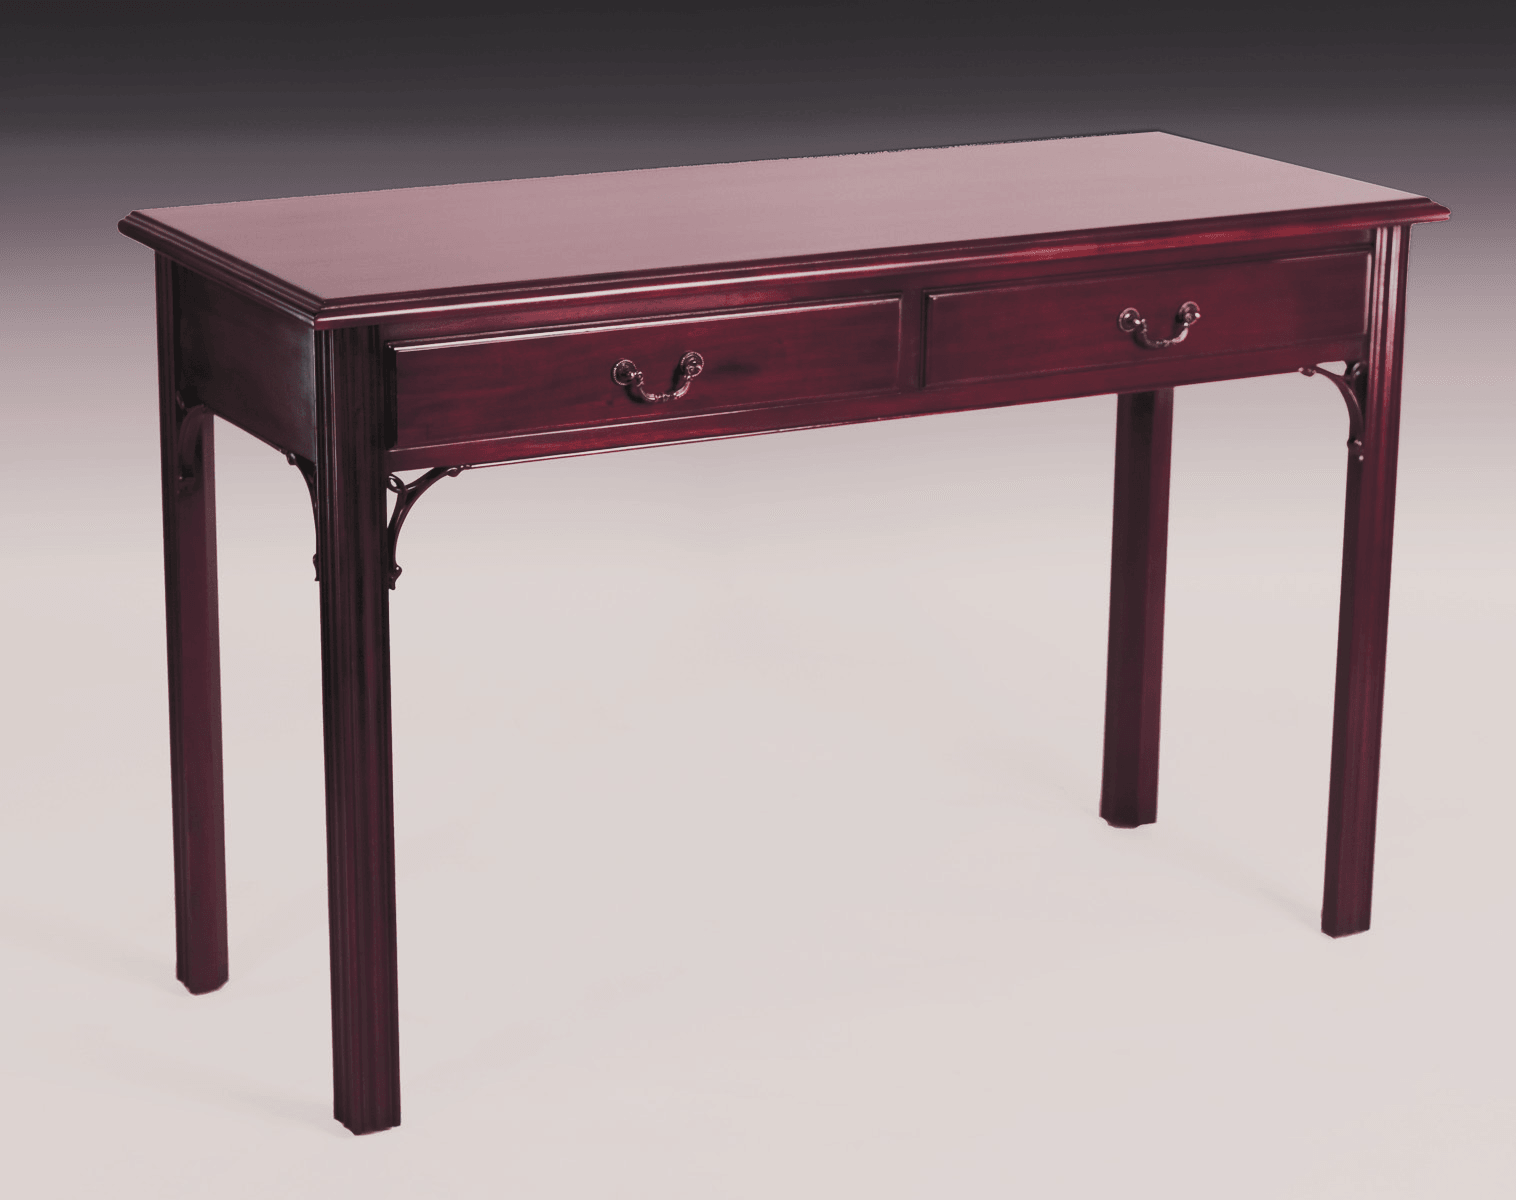 CHIPPENDALE STYLE DESK - House of Chippendale